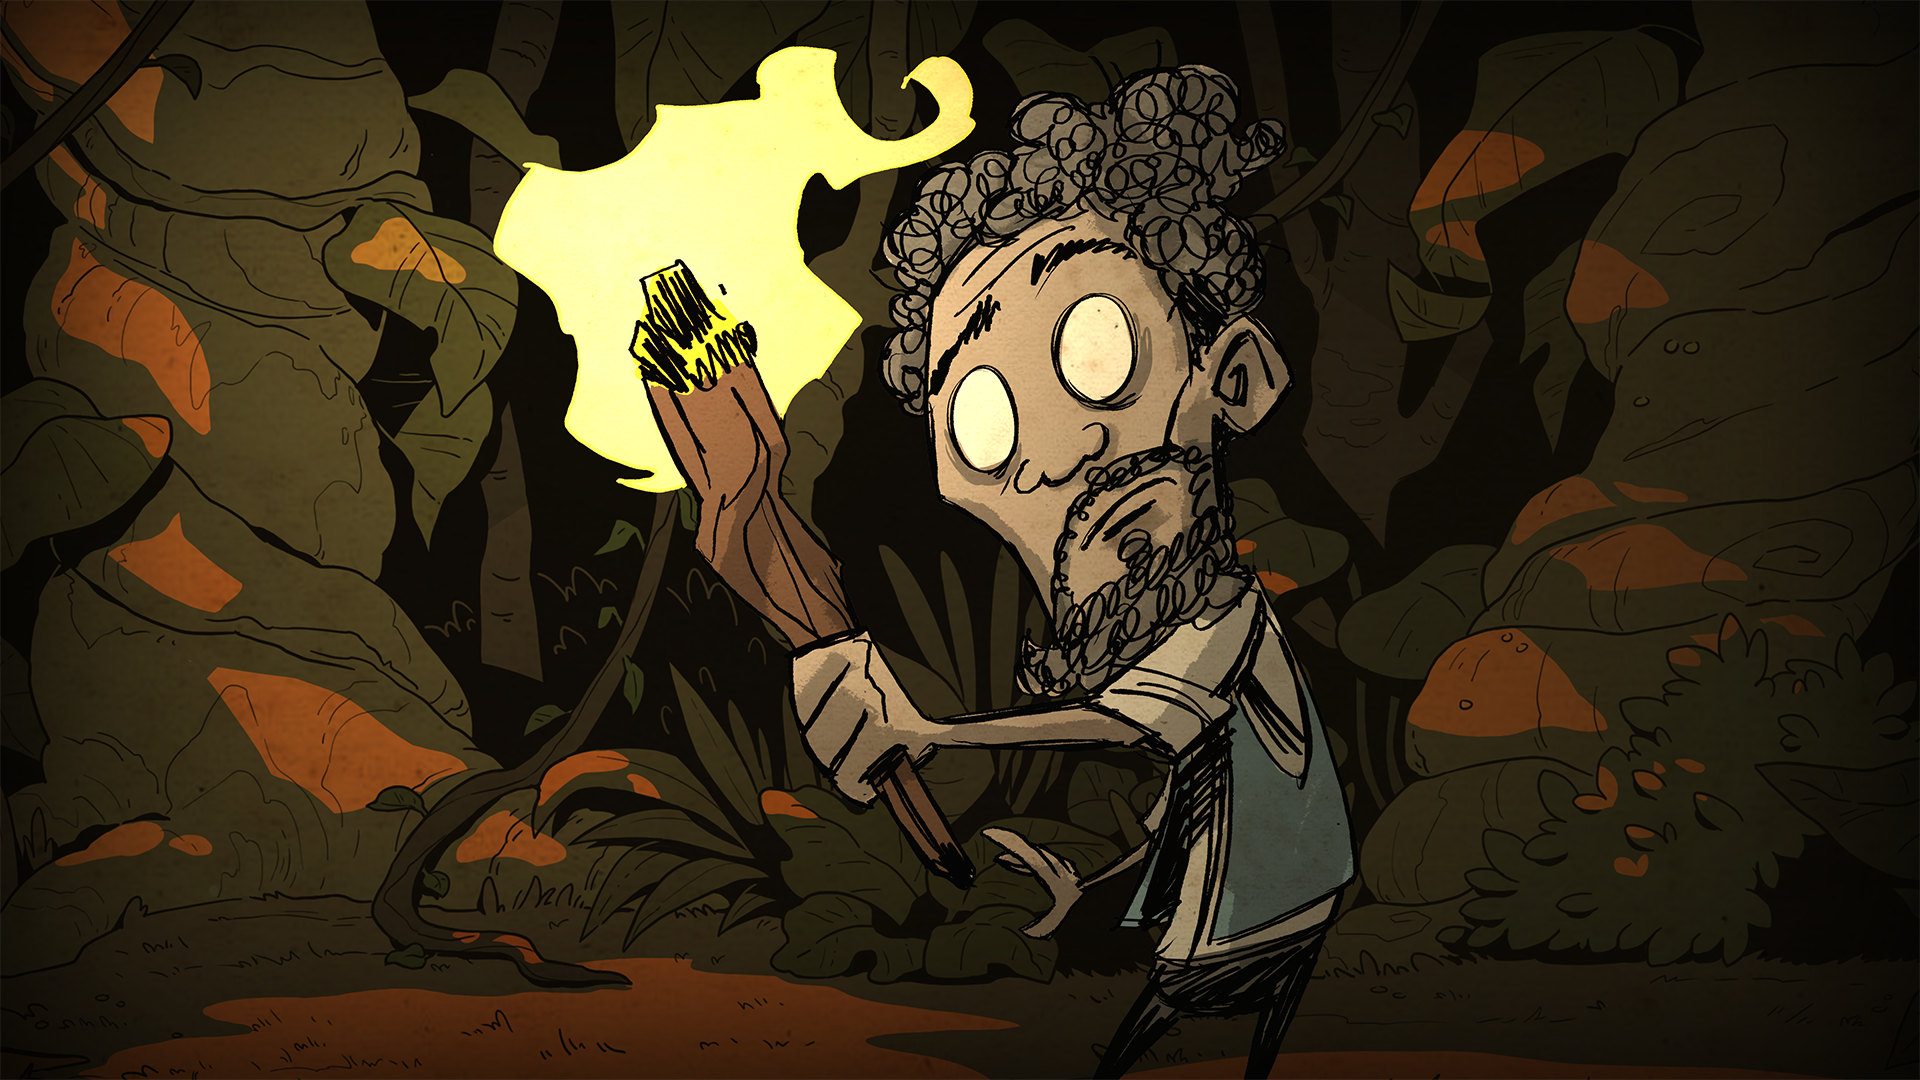 Варли донт старв. Don't Starve together Варли. Варли don't Starve арт. ДСТ don't Starve together.